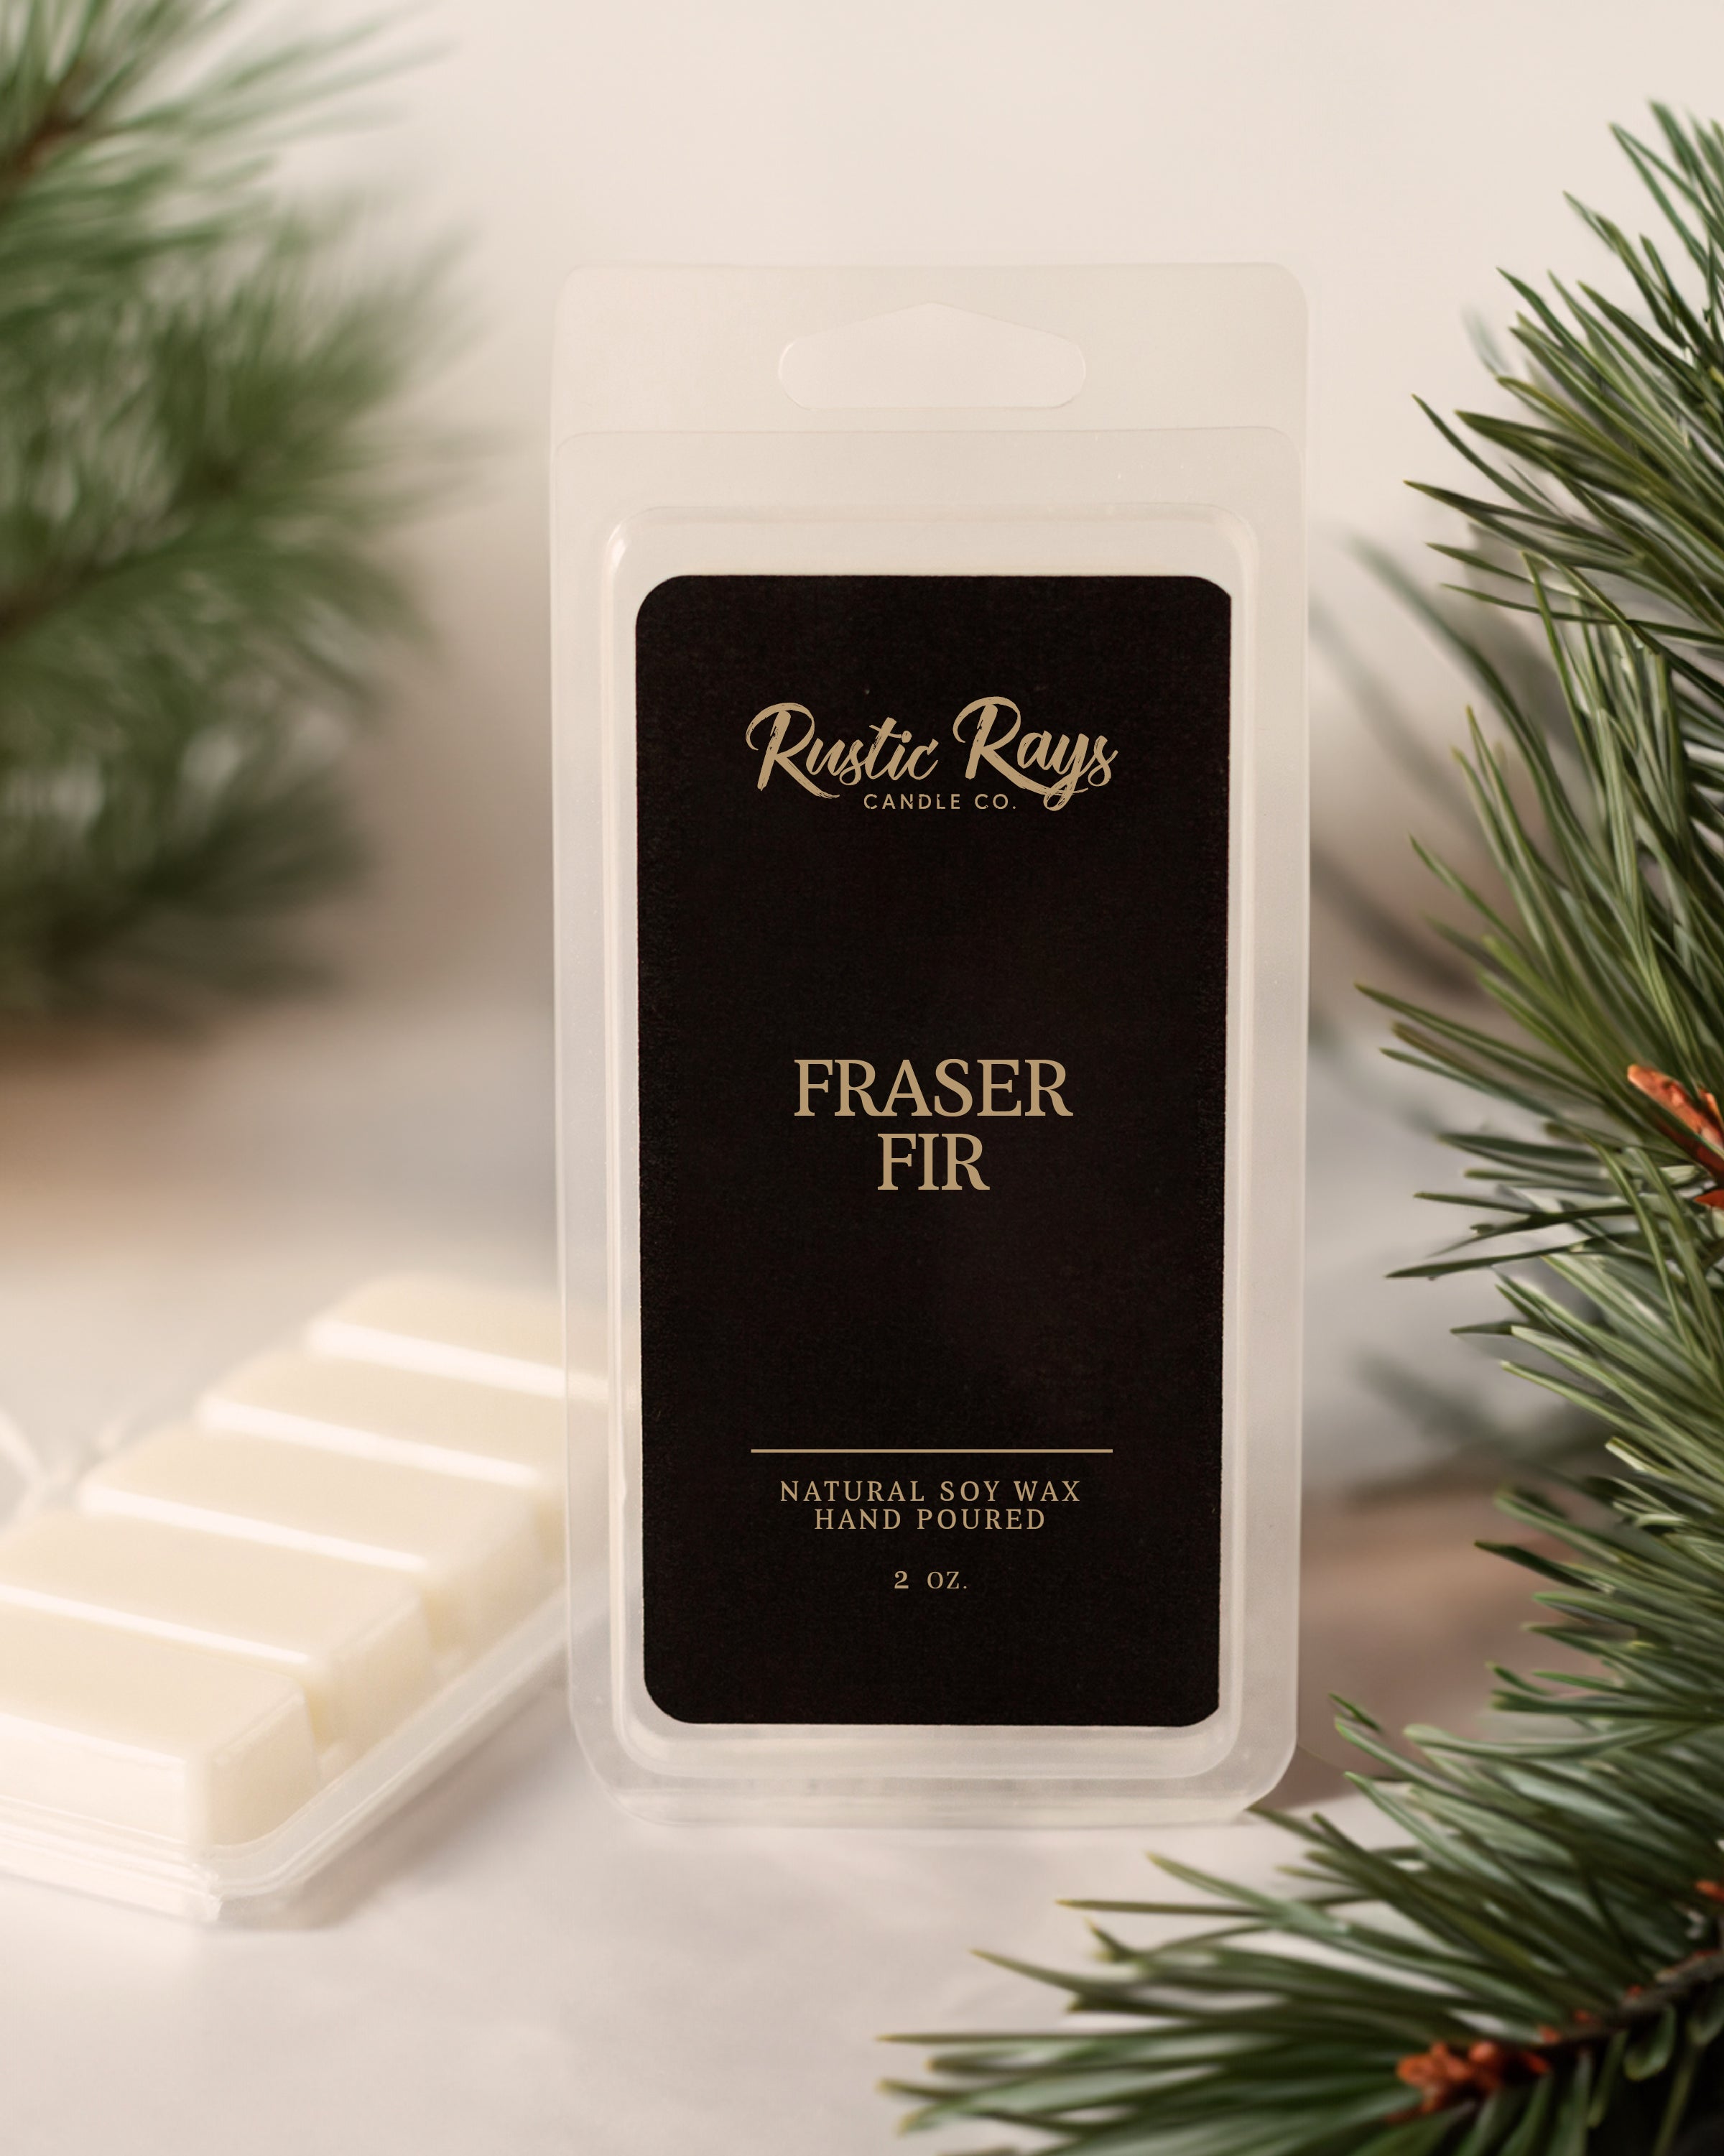 Earthy, Woodsy Frasier Fir Scented Products  Premium Home Fragrance –  Olfactory Scent Studio